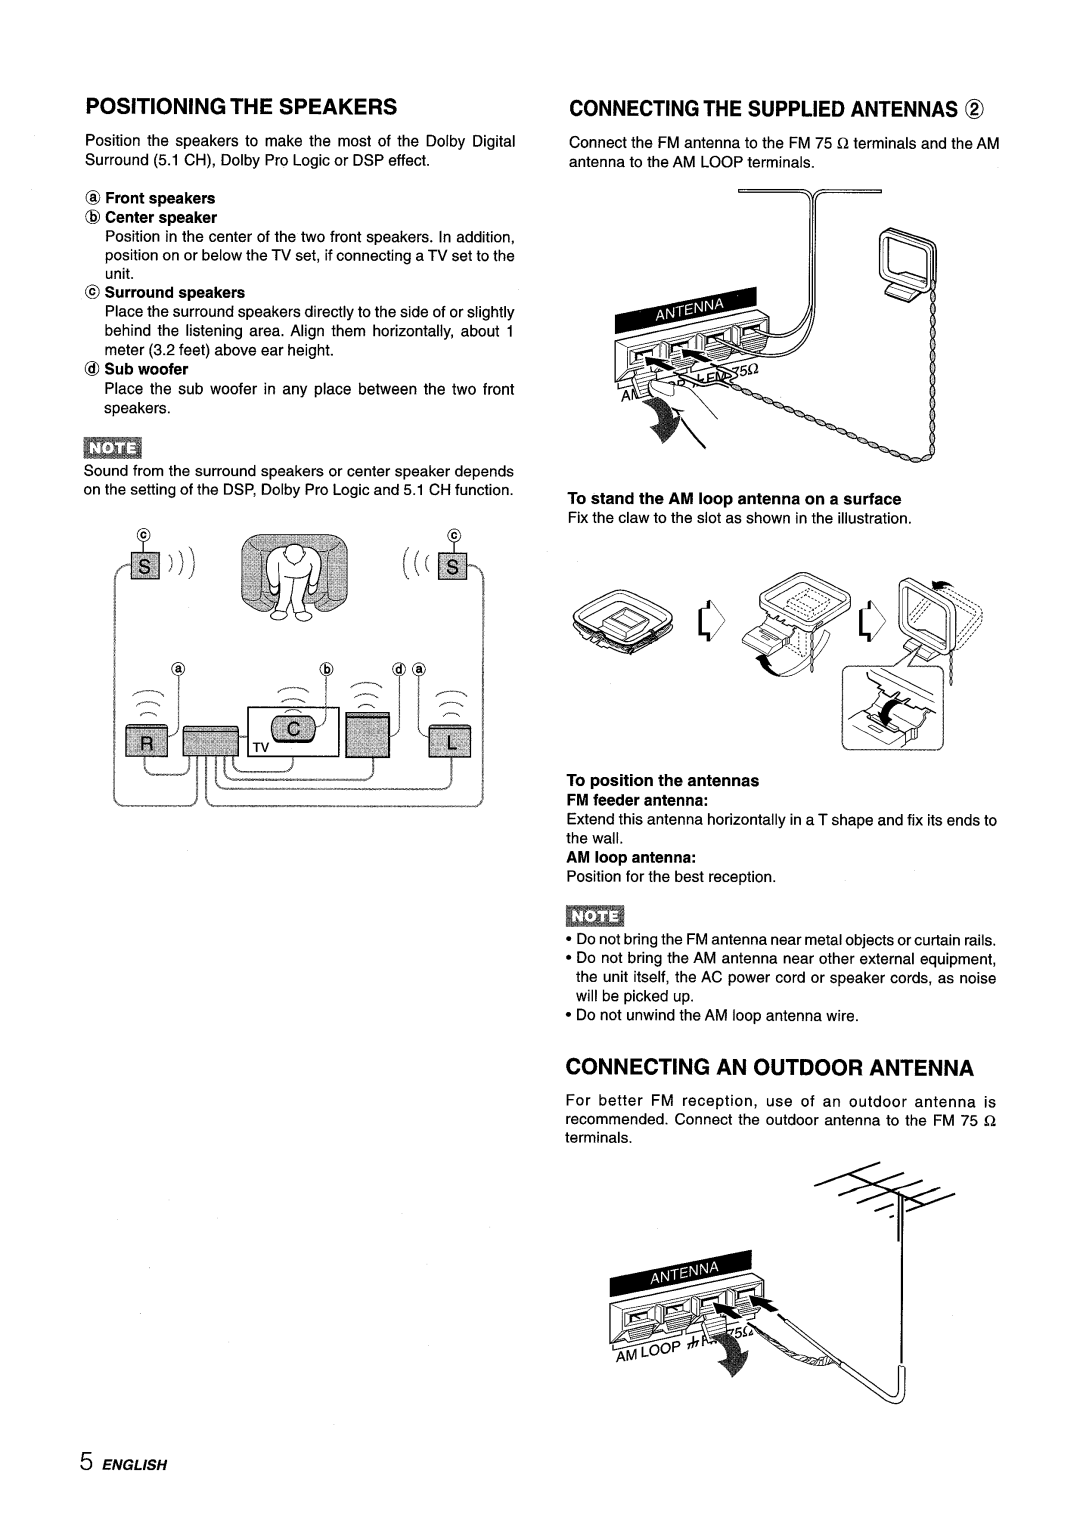 Aiwa AV-D35 Positioning The Speakers, Connecting The Supplied Antennas @, Connecting An Outdoor Antenna, @ Sub woofer 